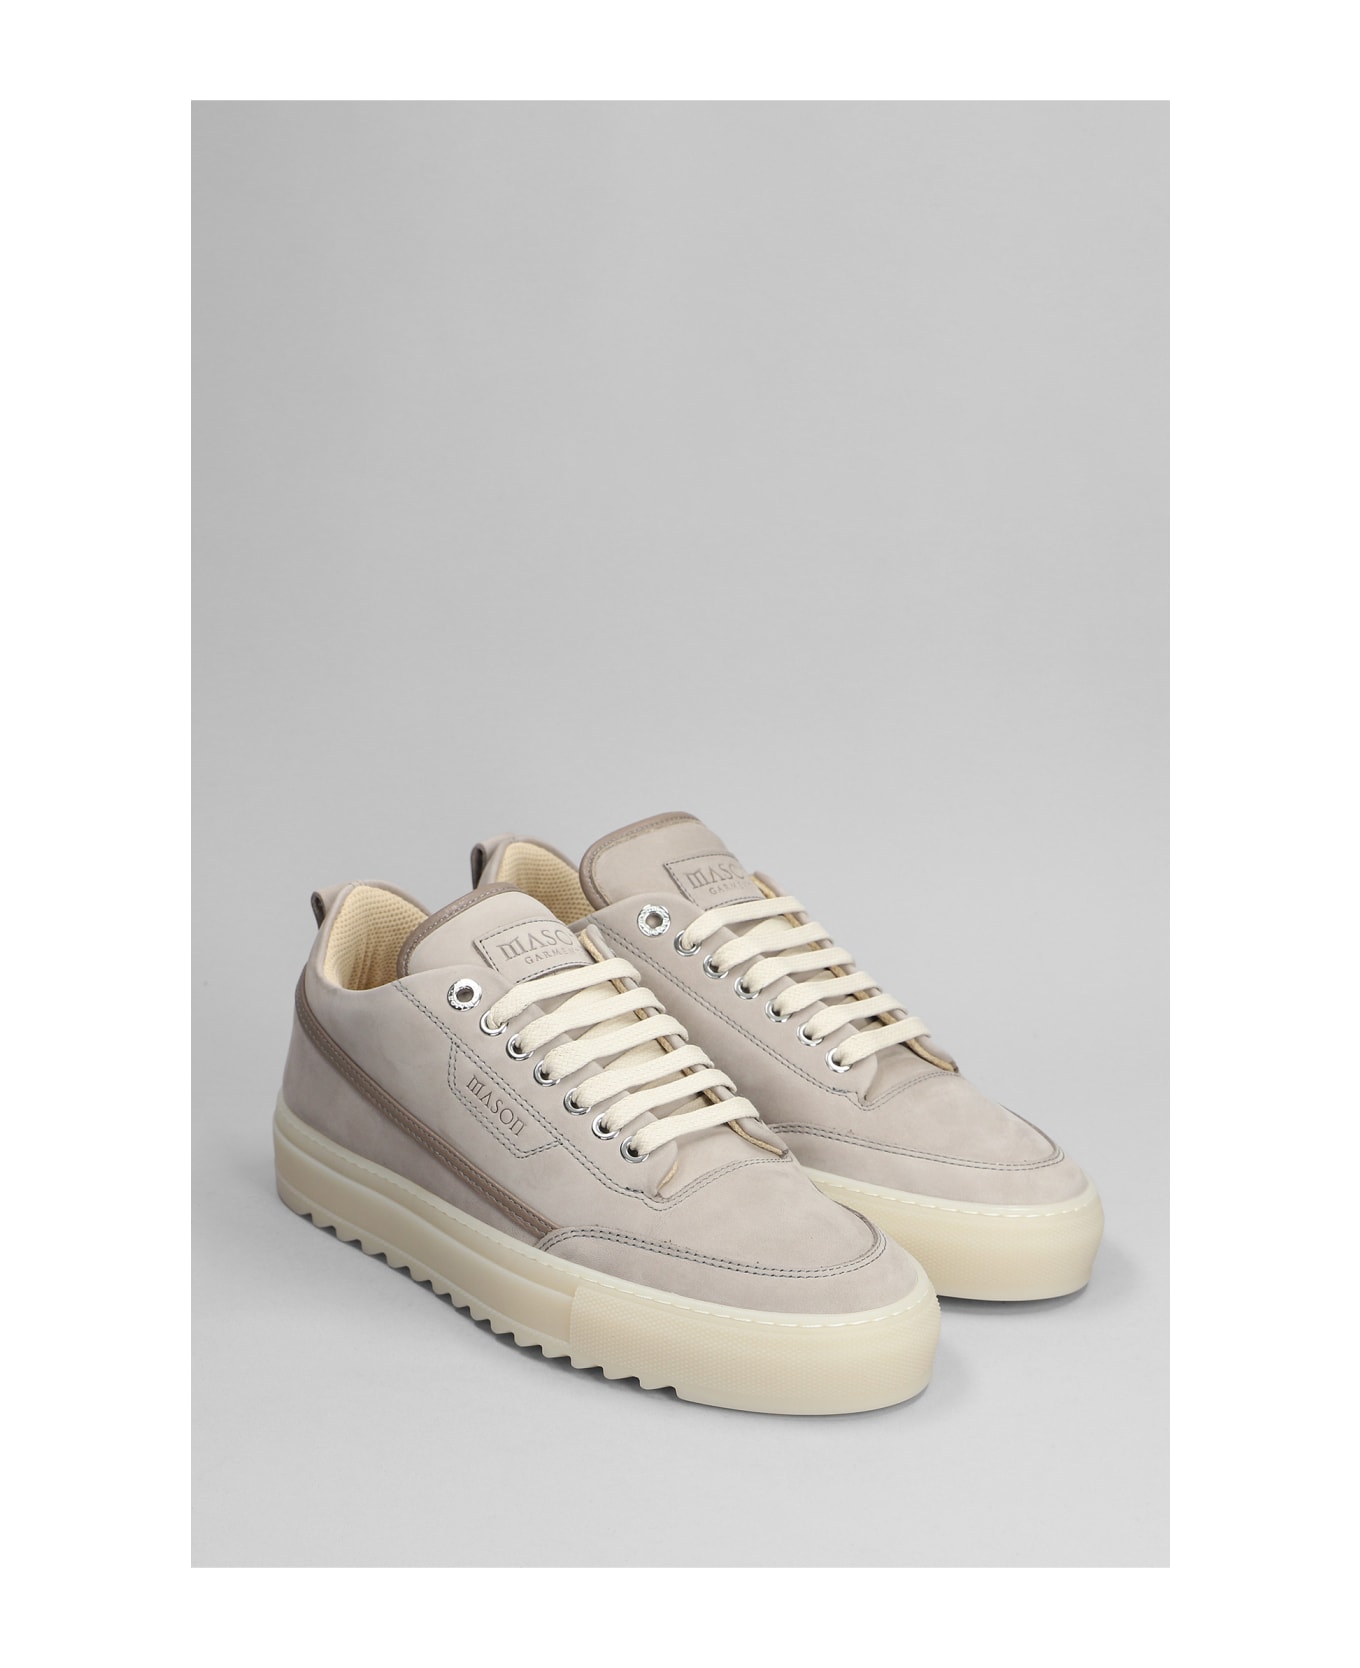 Mason Garments Torino Sneakers In Taupe Leather - taupe スニーカー